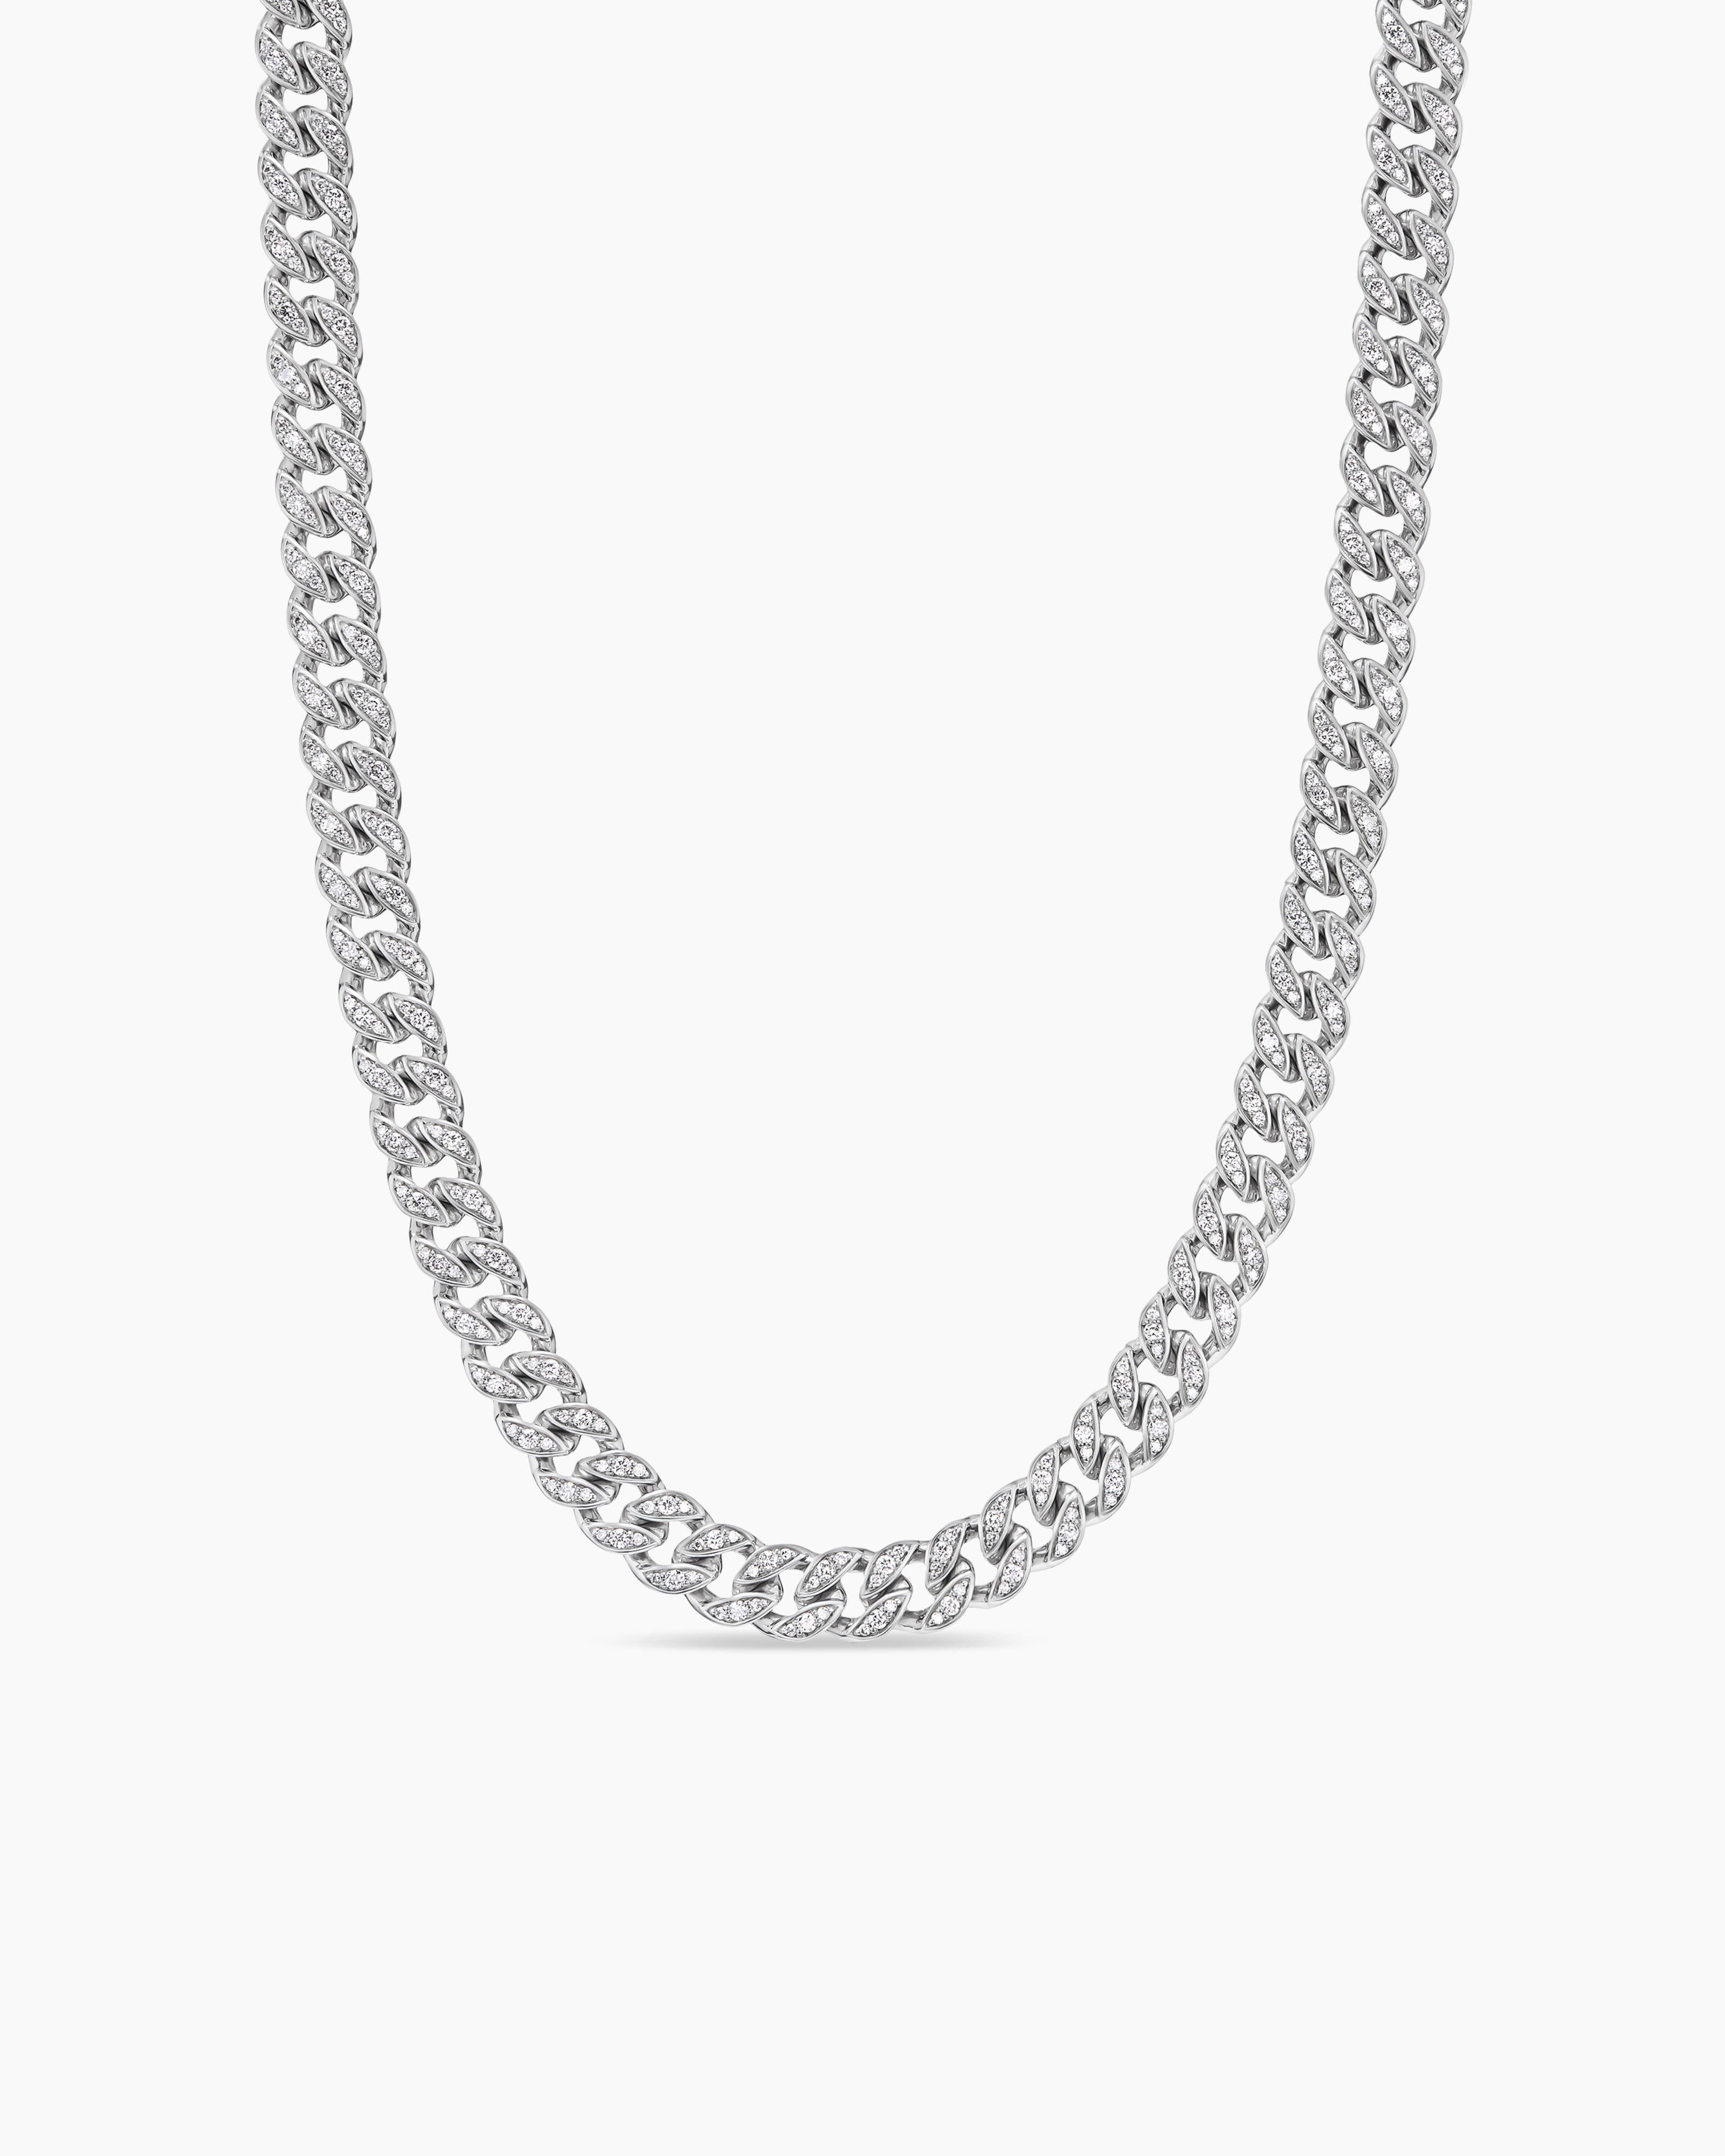 Cuban Curb Necklace Chain in Sterling Silver